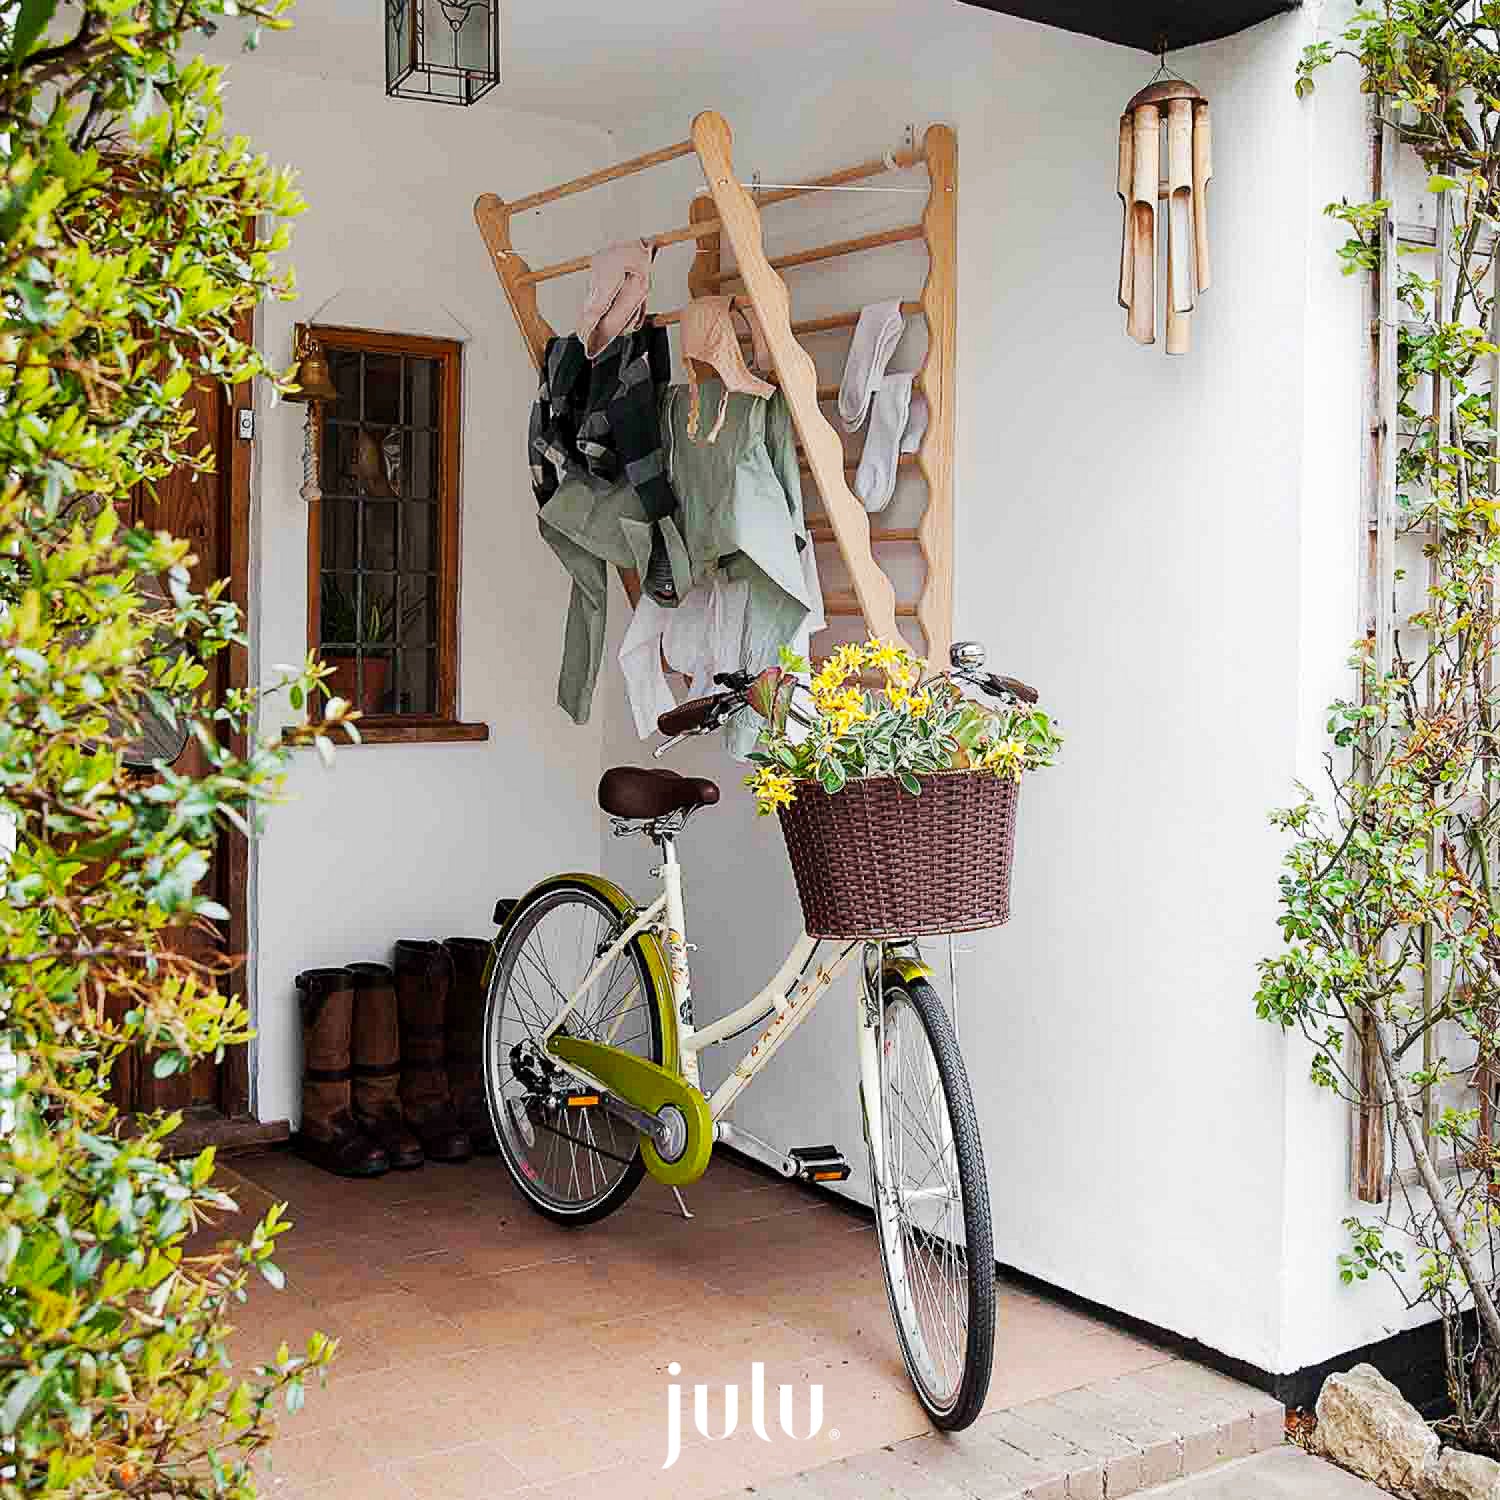 Julu Laundry Ladders being used outdoors 